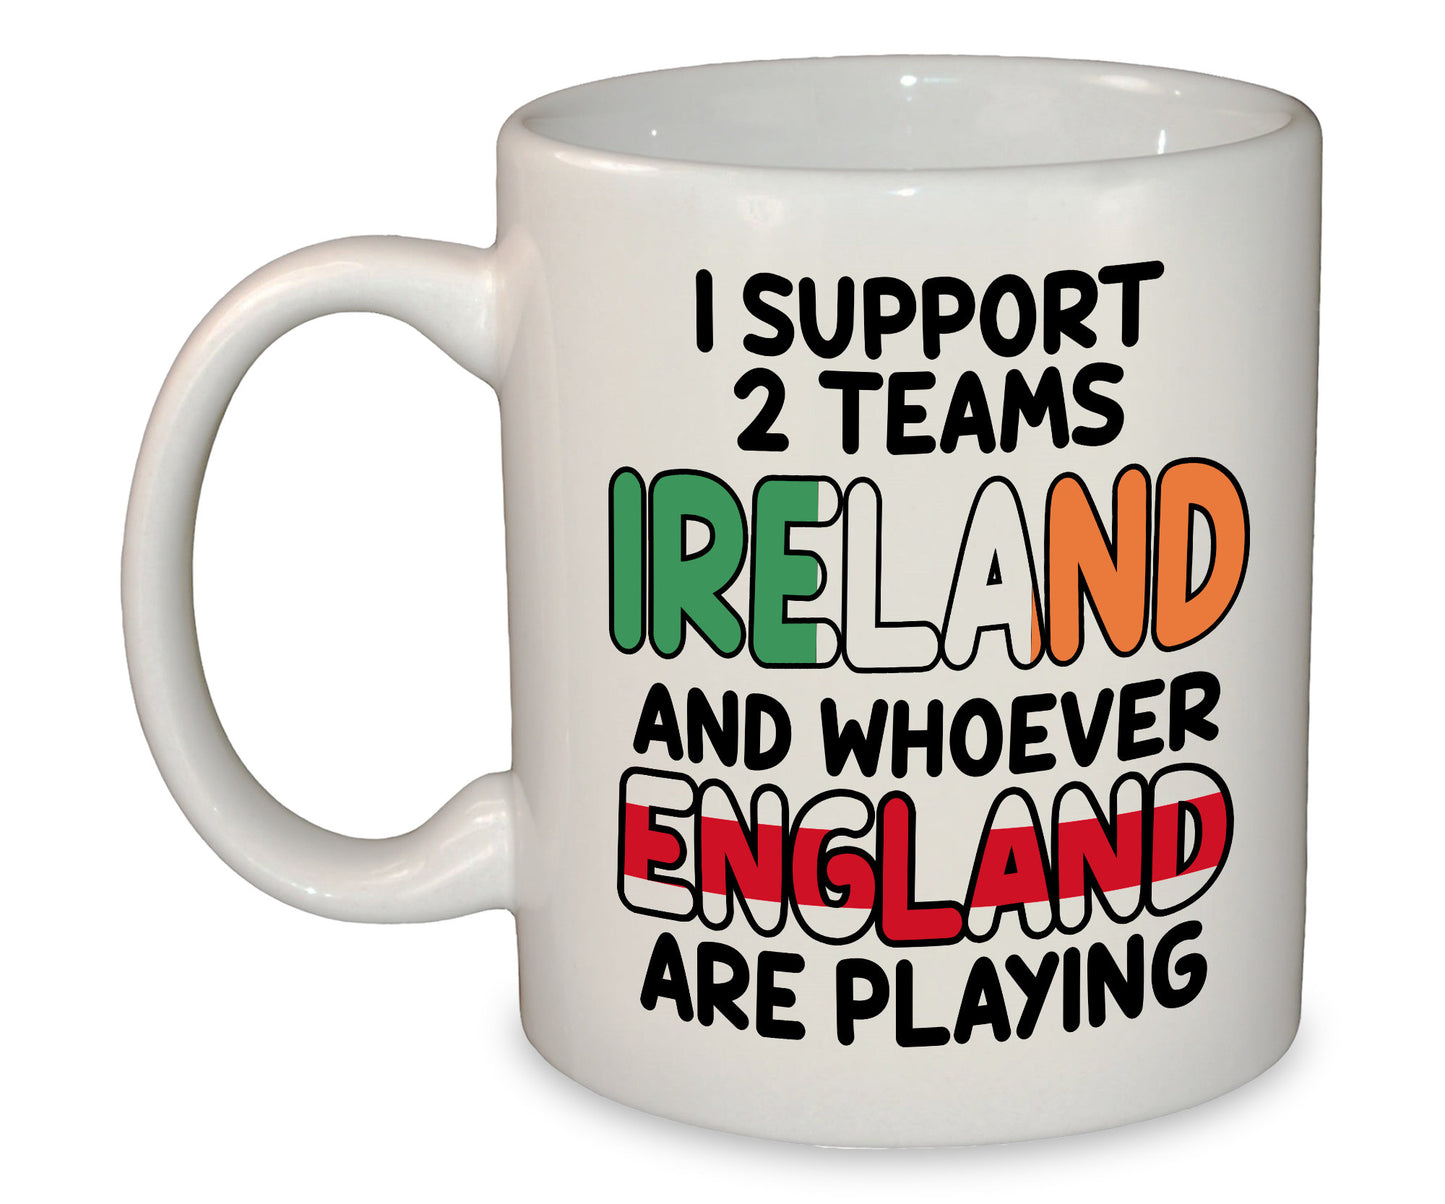 I Support Ireland and Whoever England are Playing Mug / Cup | Welsh Rugby Sport Ceramic 11oz